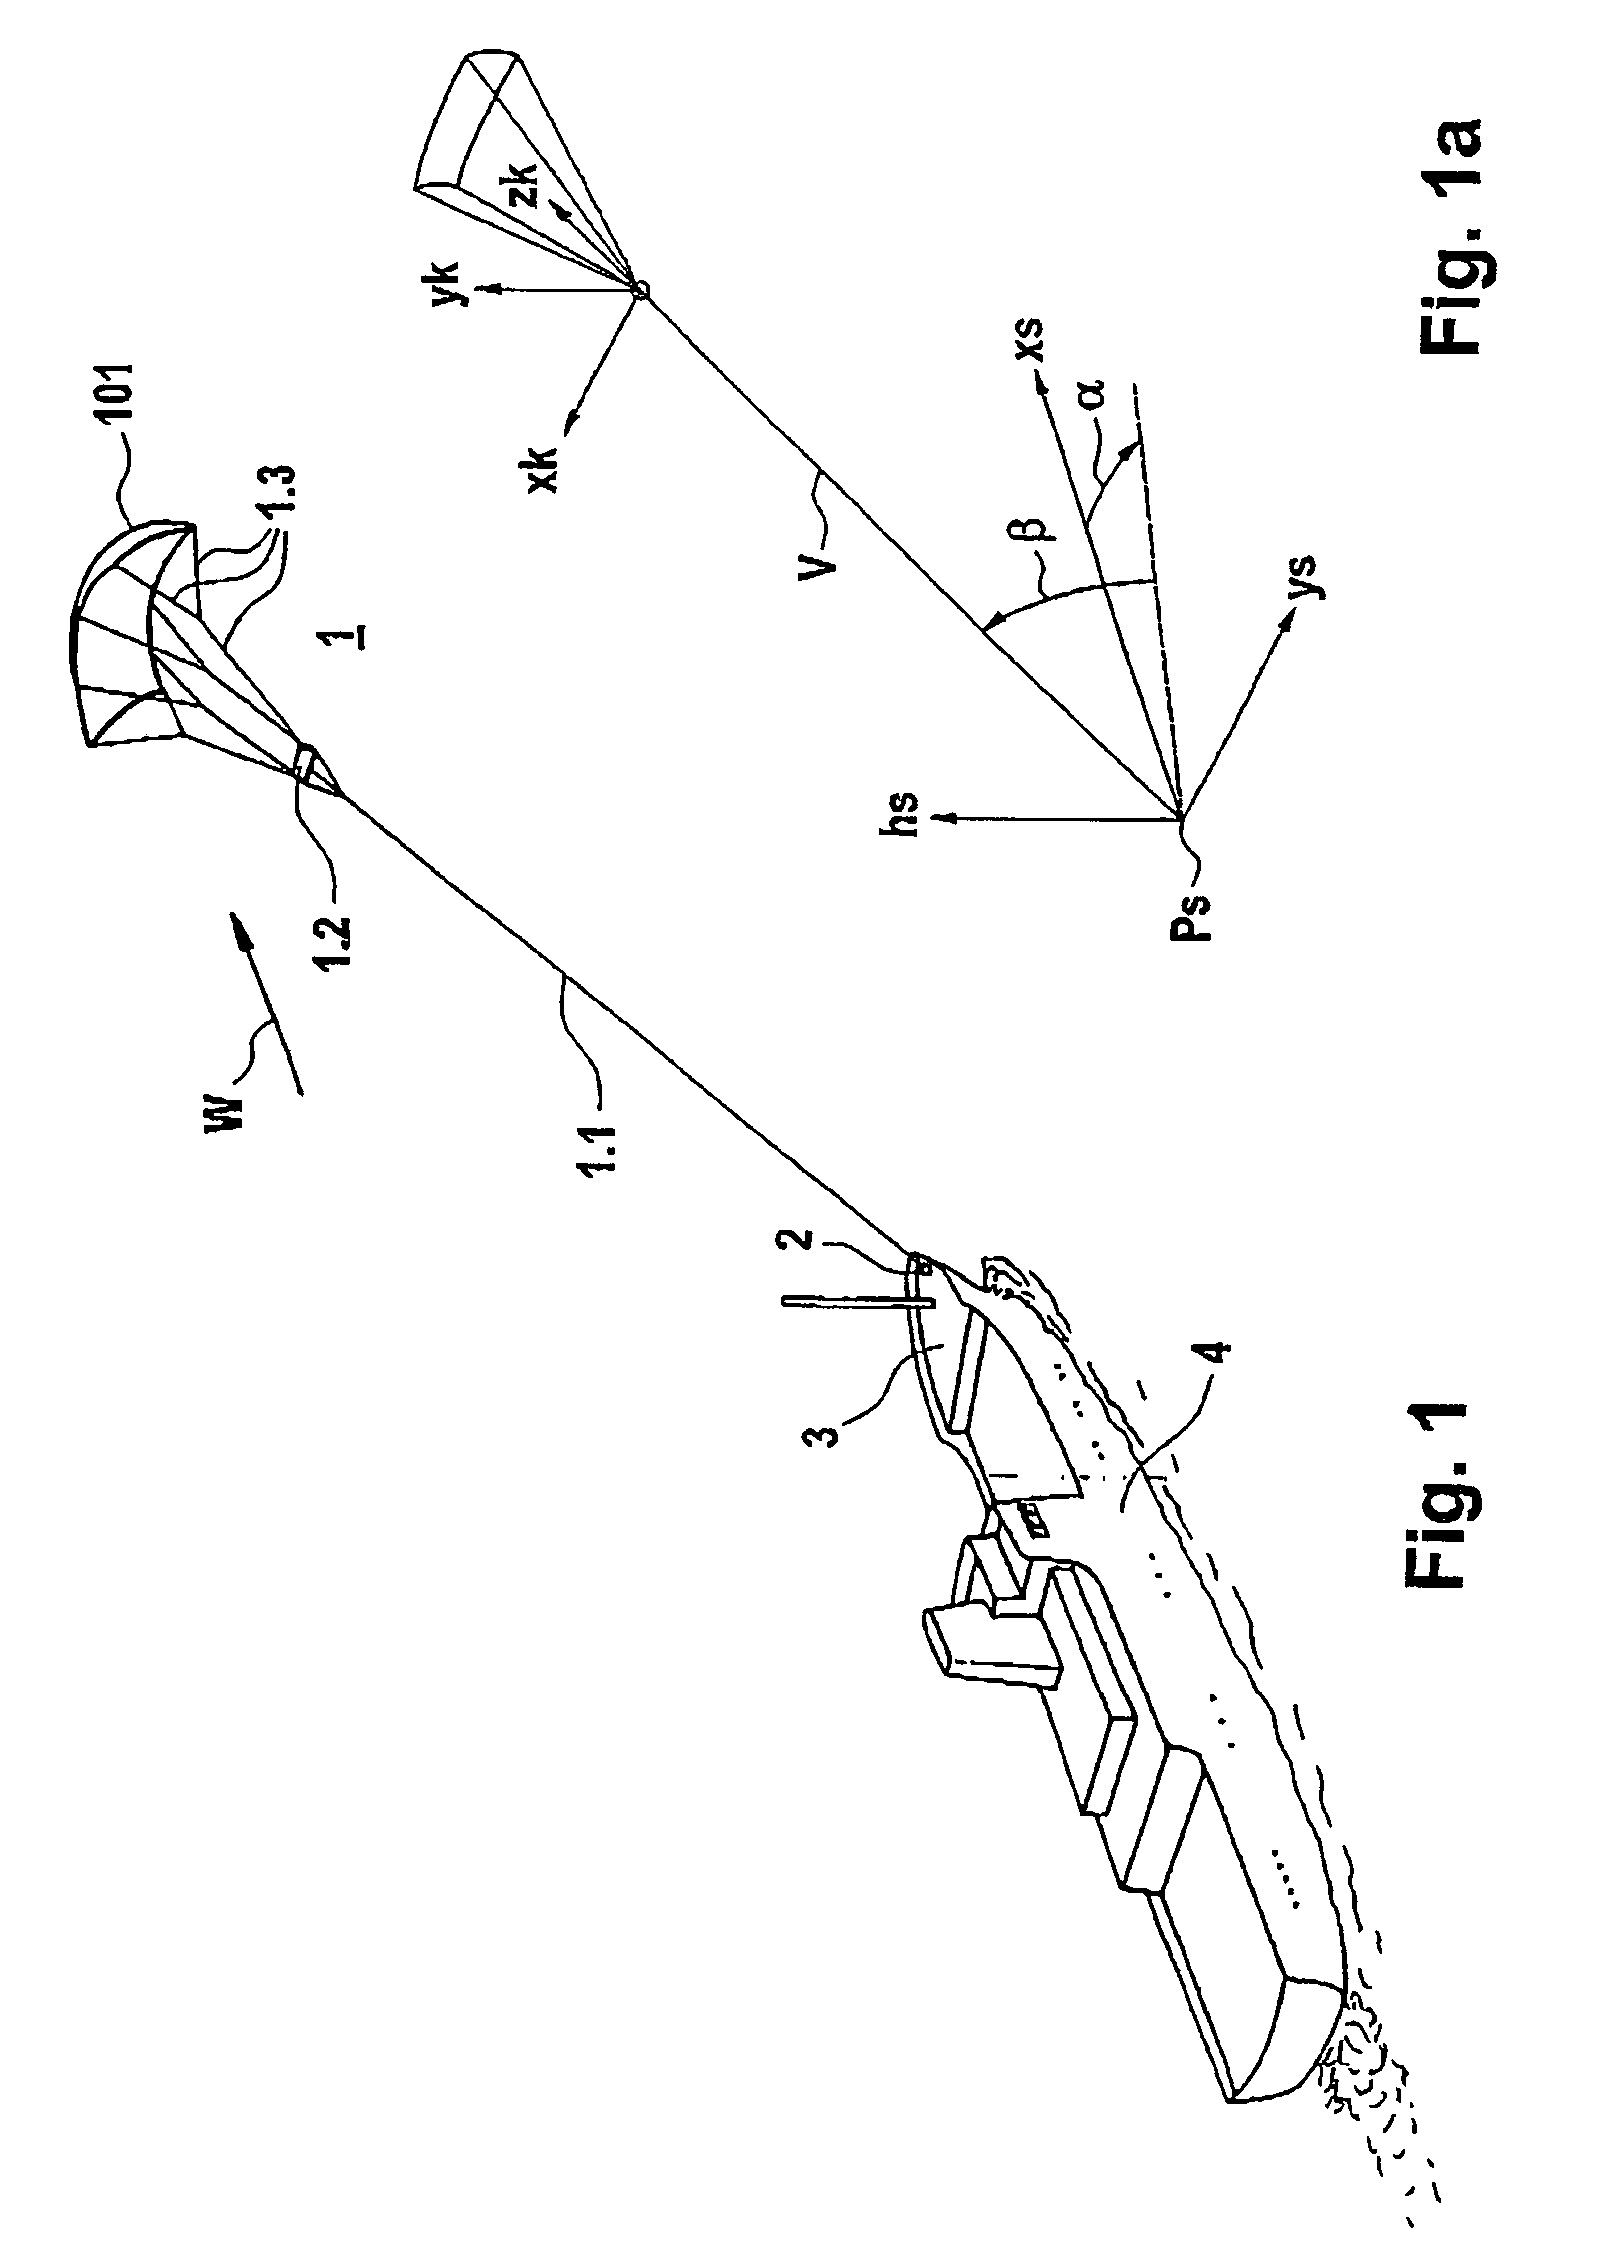 Watercraft comprising a free-flying kite-type wind-attacked element as a wind-powered drive unit